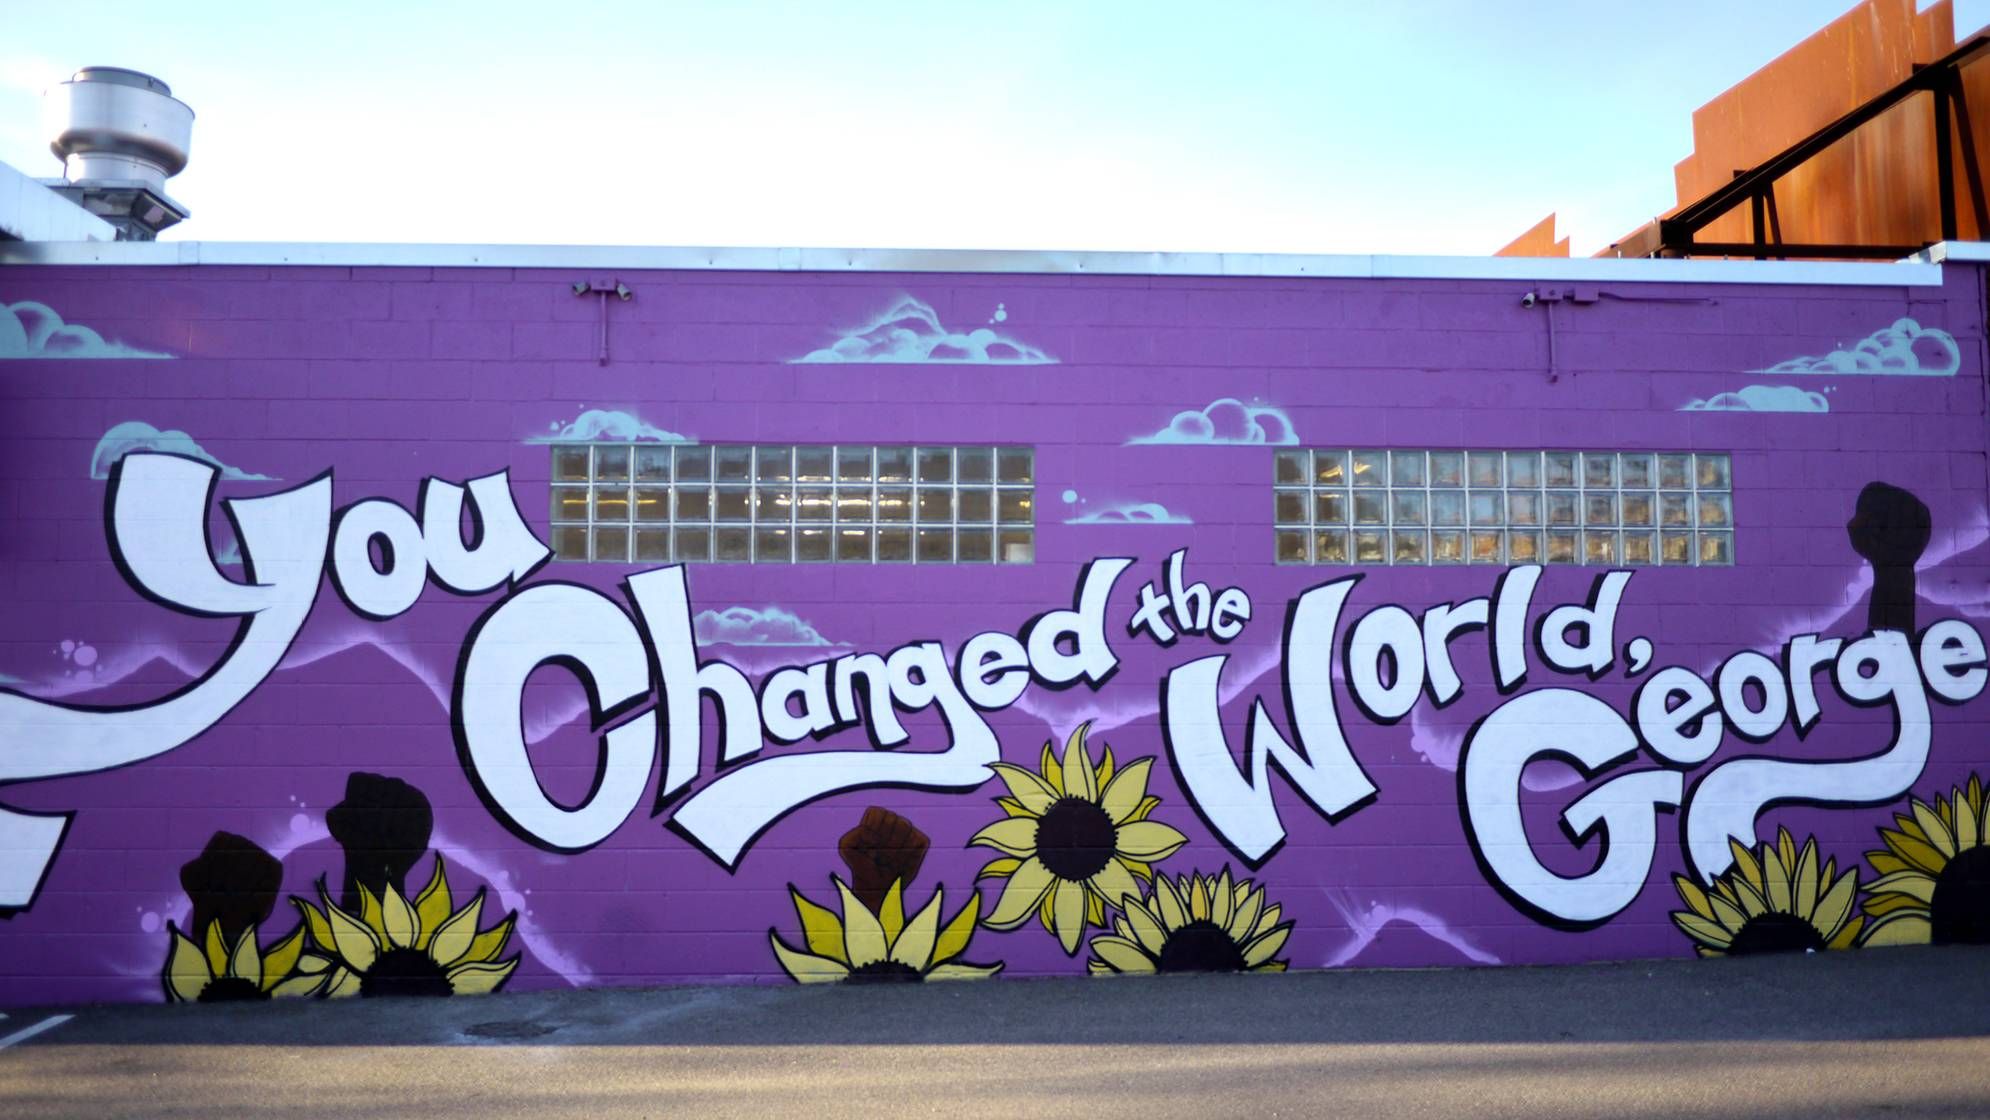 A building wall painted purple with "You Changed the World George" painted in white.